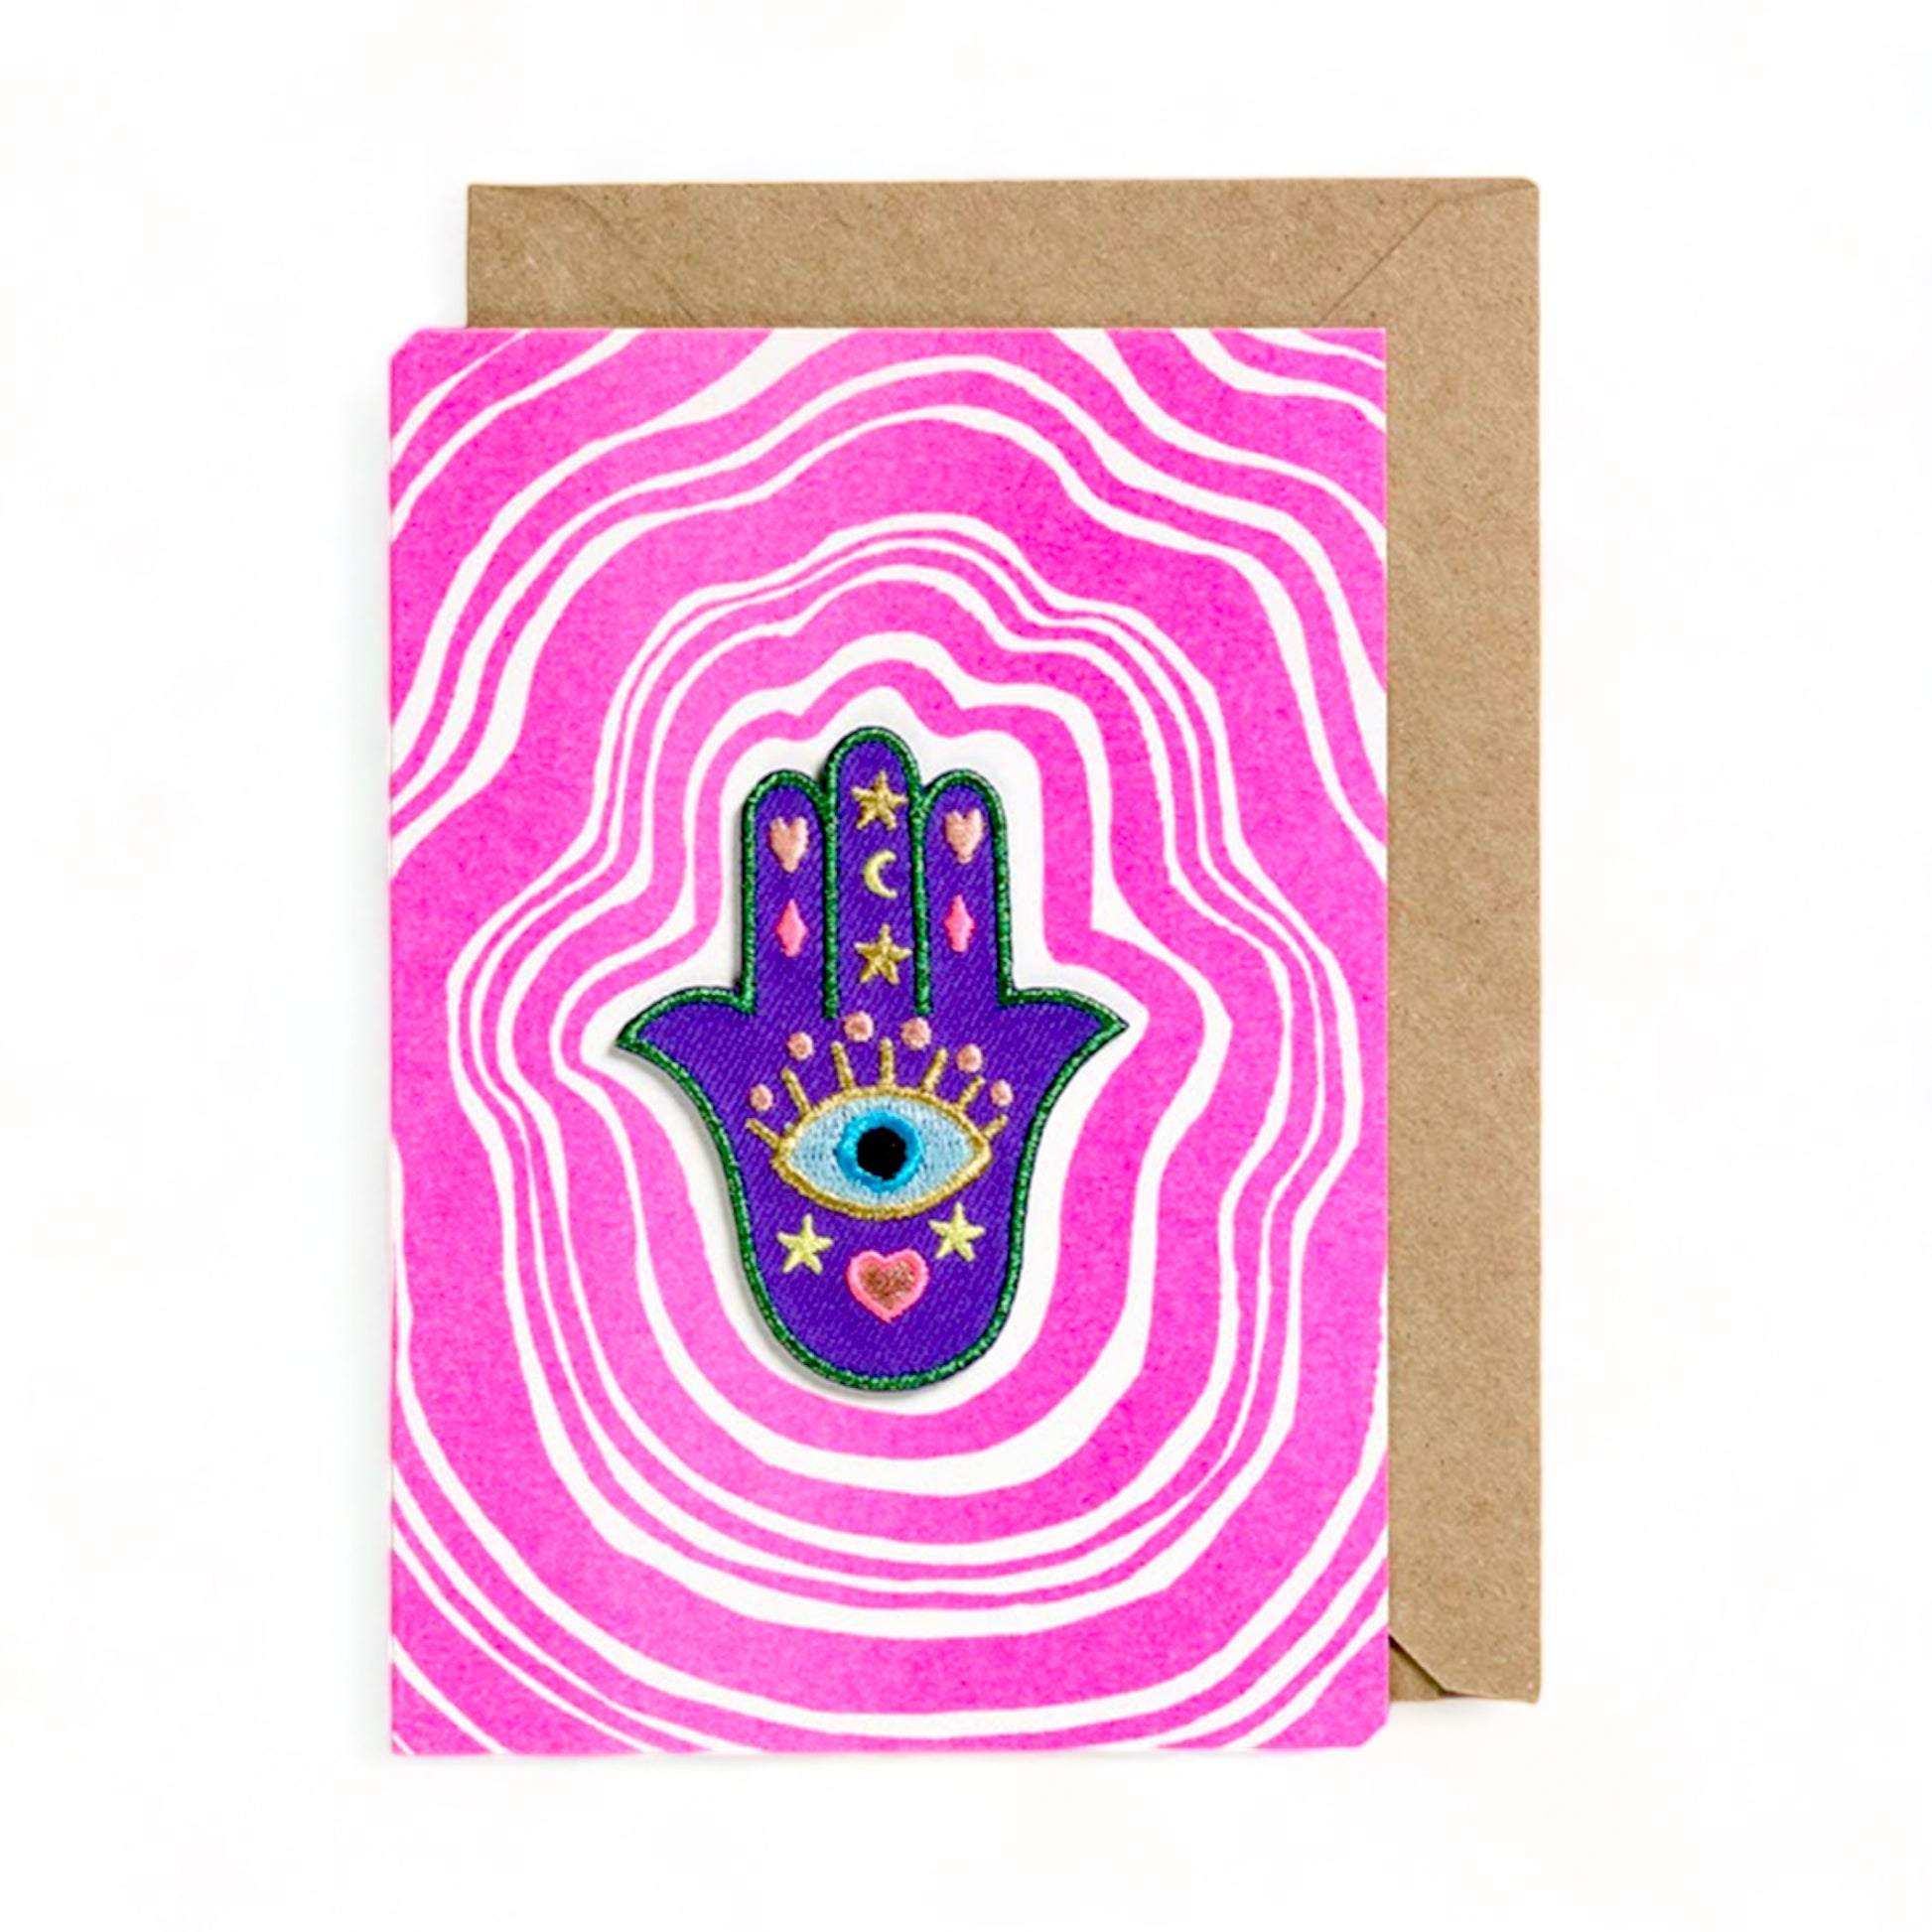 Embroidered Patch Greeting Card - Hamsa - Hella Kitsch